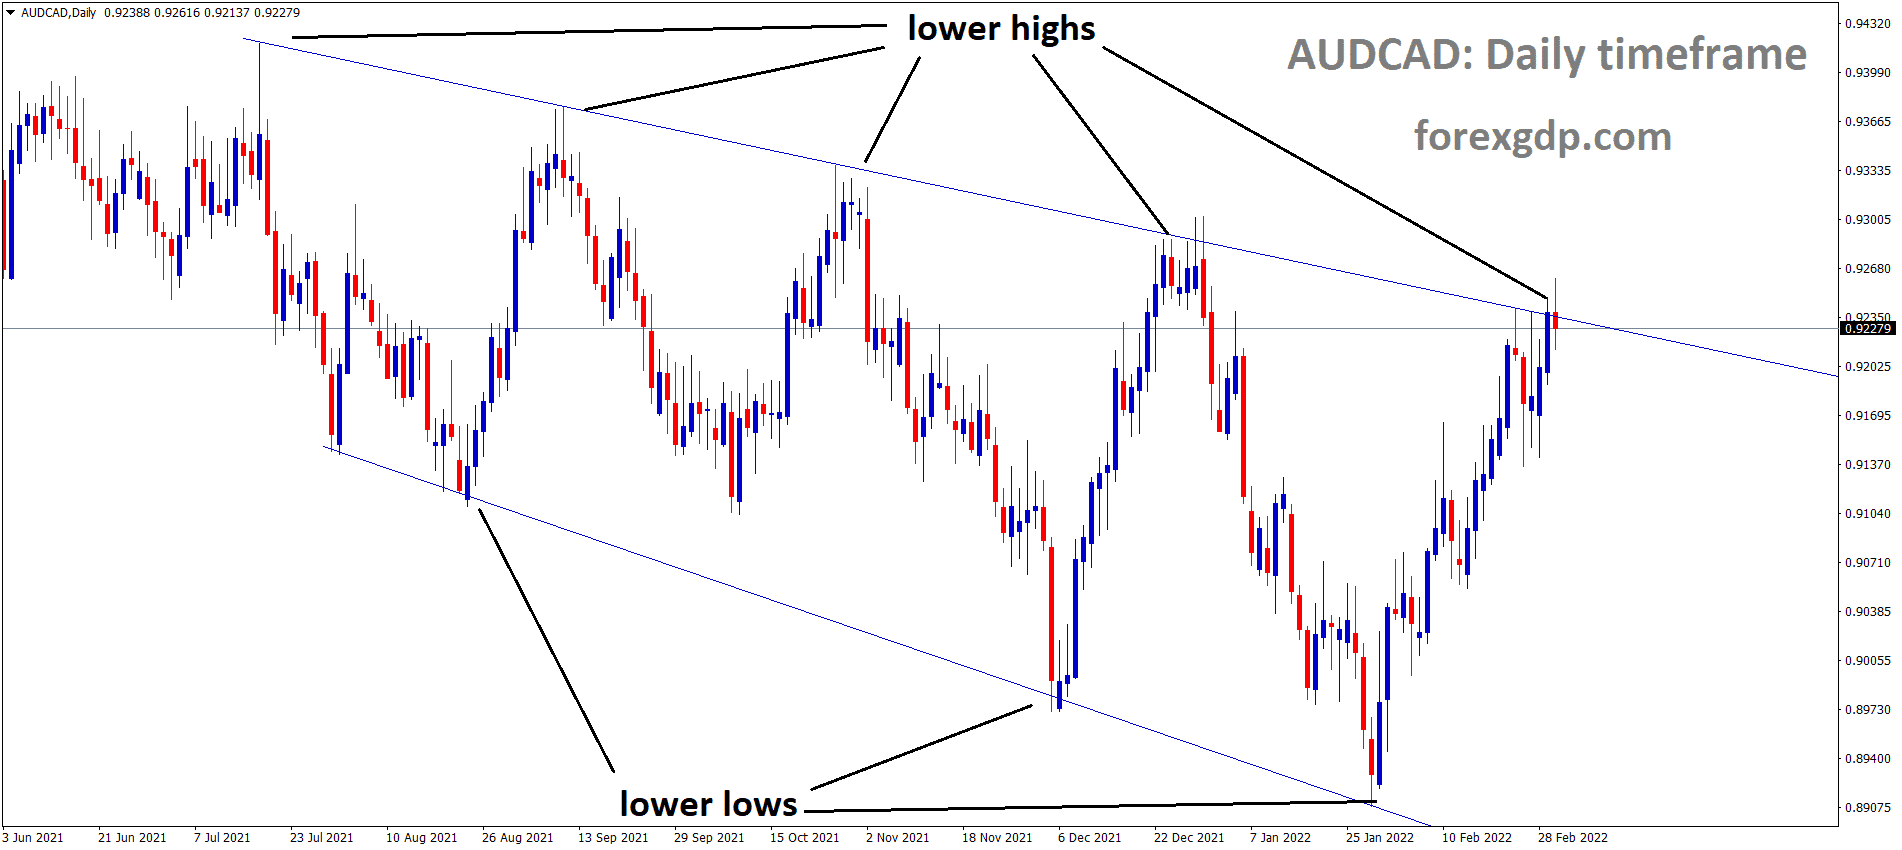 AUDCAD is moving in the Descending channel and the market has reached the lower high area of the channel.